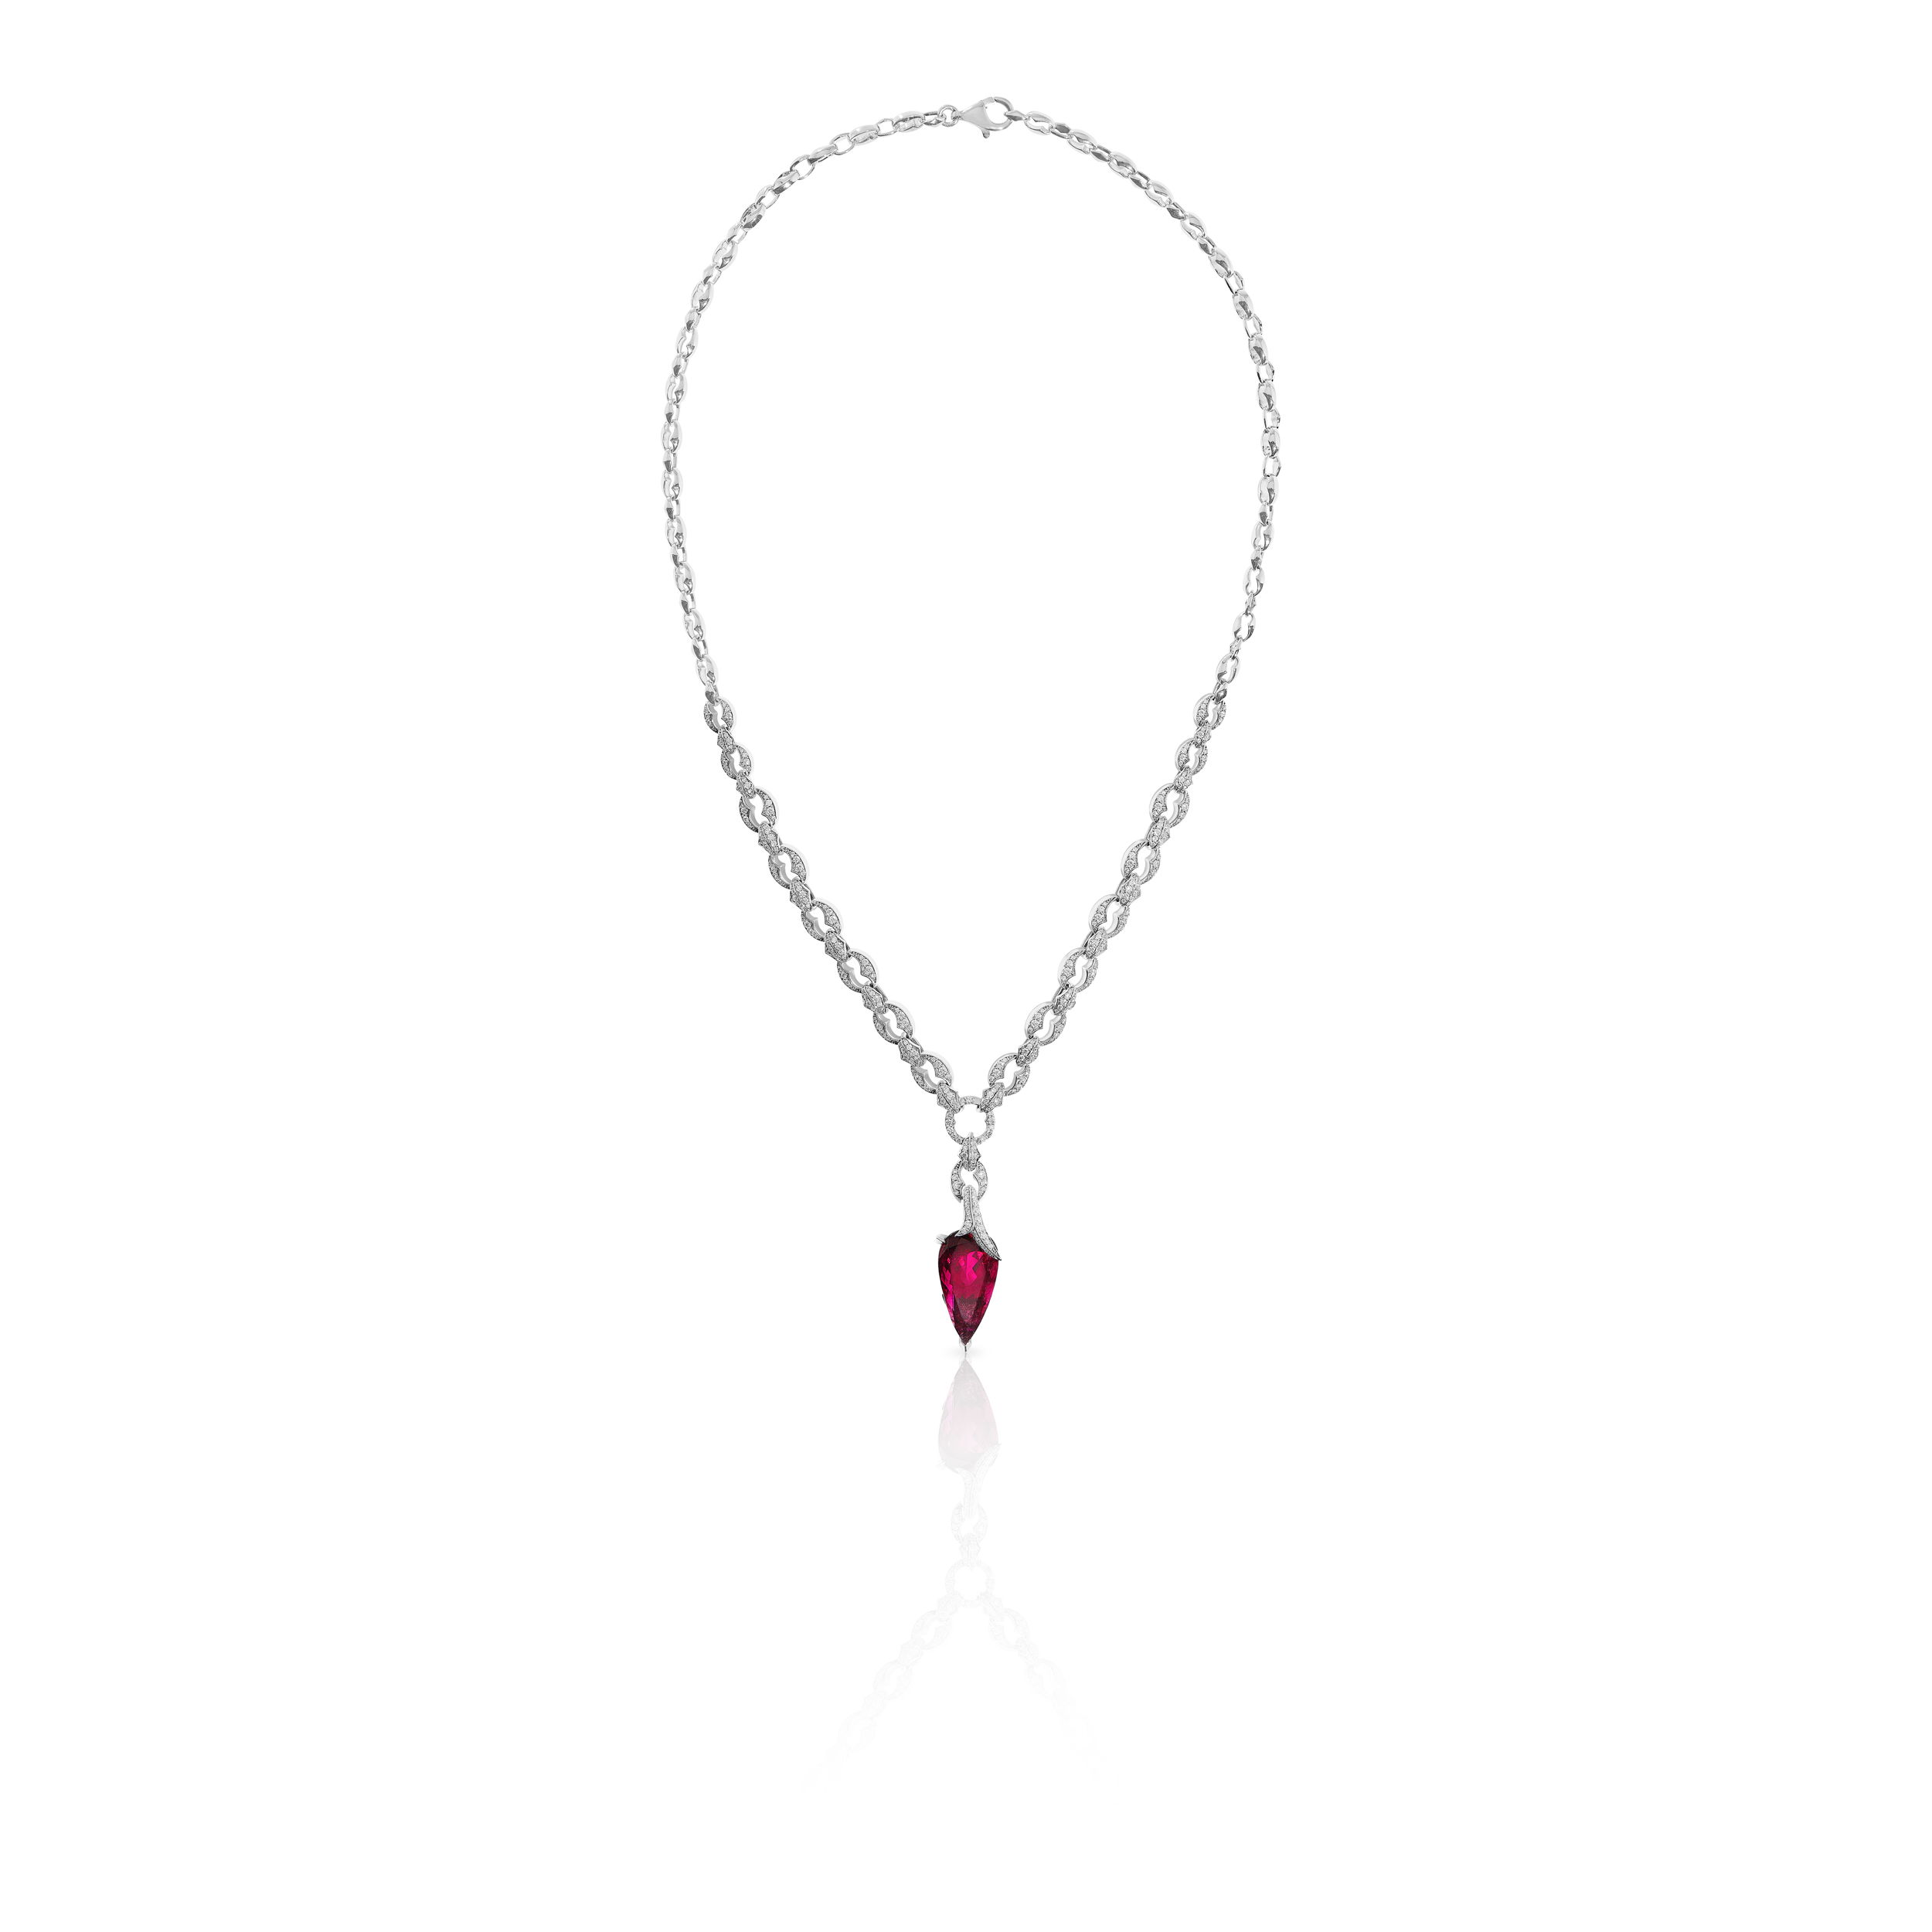 Thorn Embrace Pear Drop Necklace with Rubellite and White Diamonds in 18kt White Gold